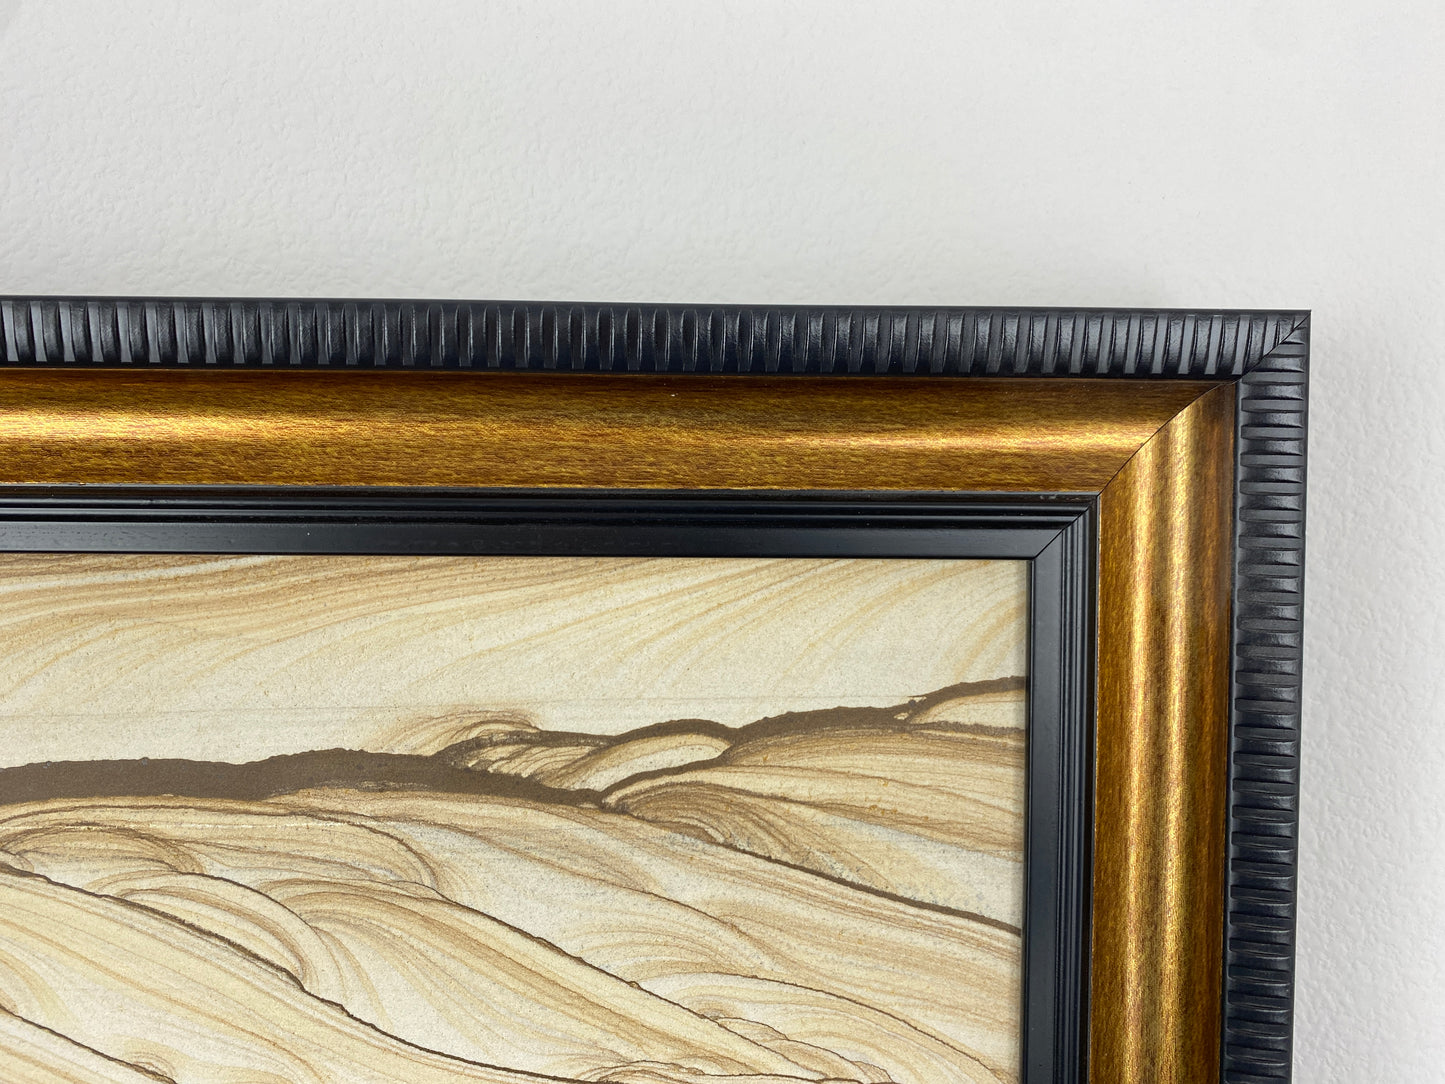 Contemporary Dream Stone, Extraordinary Natural Sandstone Painting "Desert Dunes", Wood Pattern unique and clear